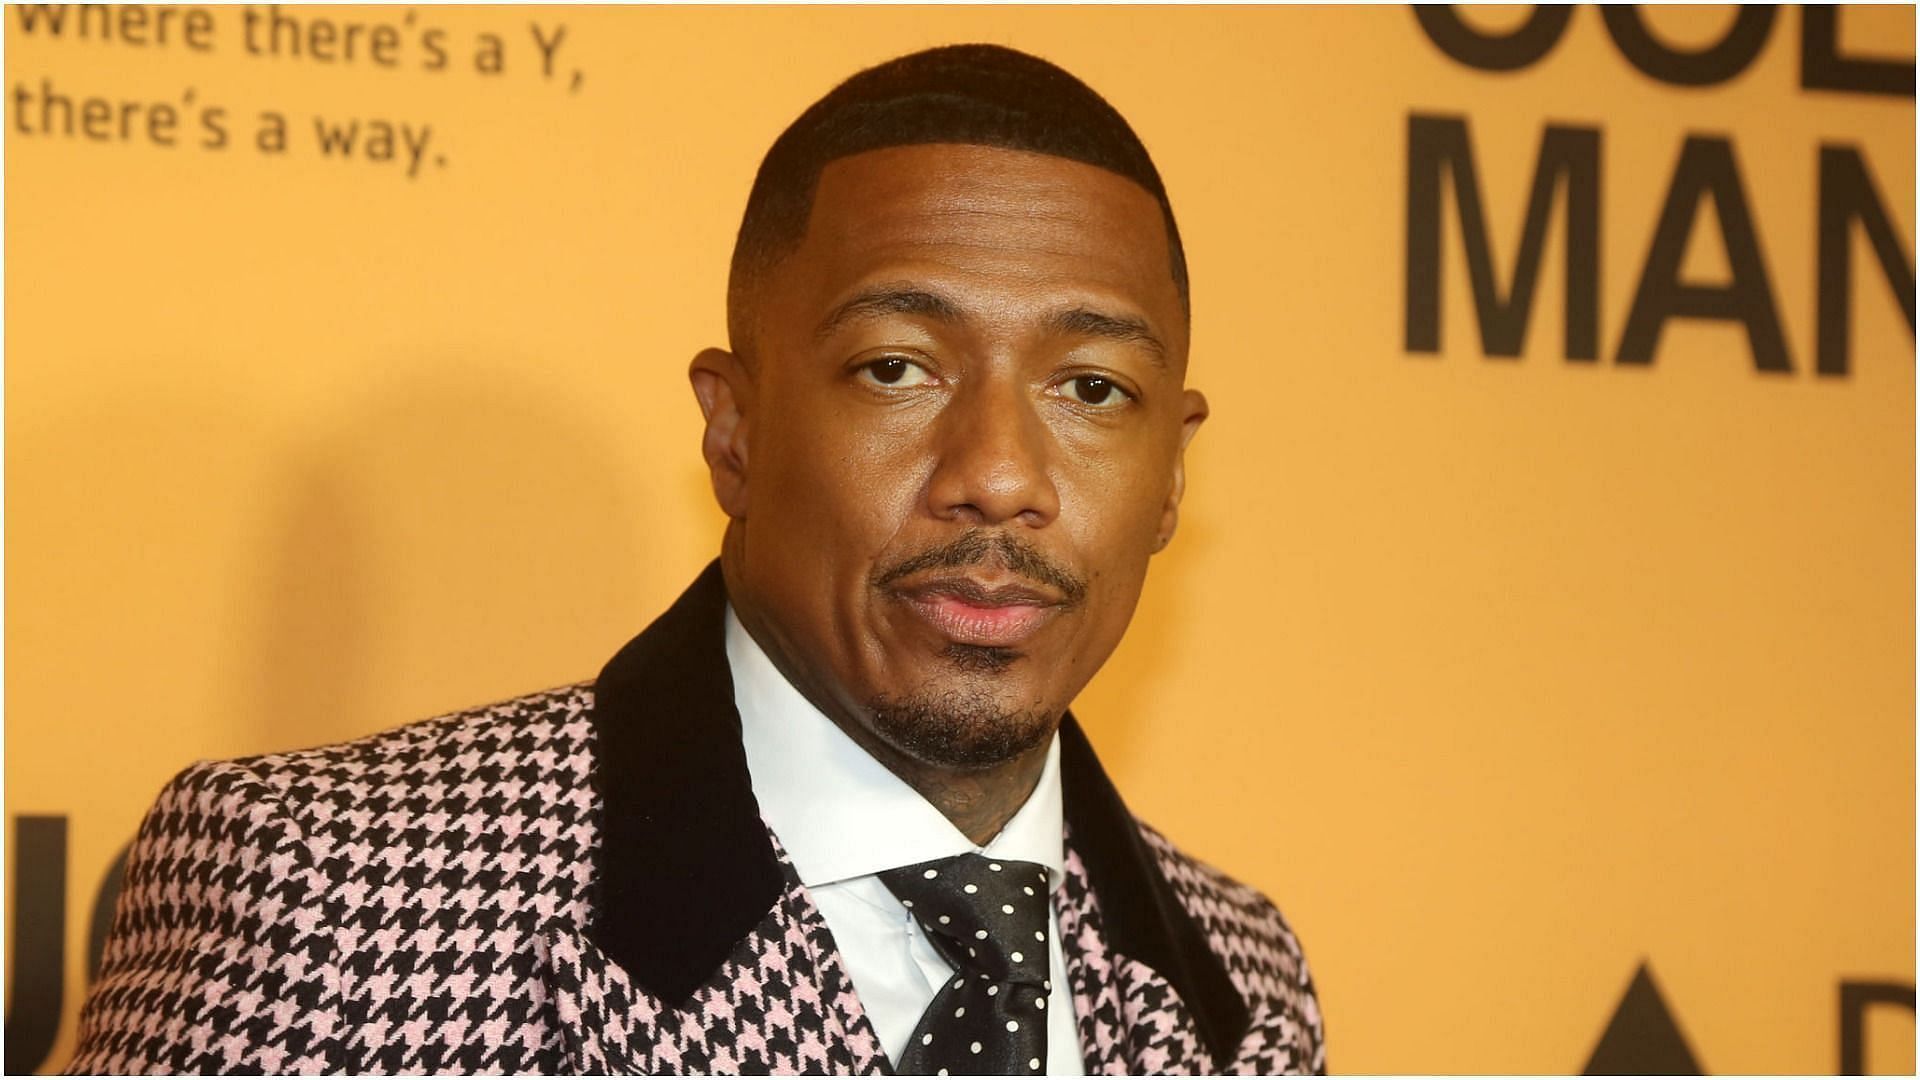 Nick Cannon pays over two million dollars in child support annually (Image via Getty Images)